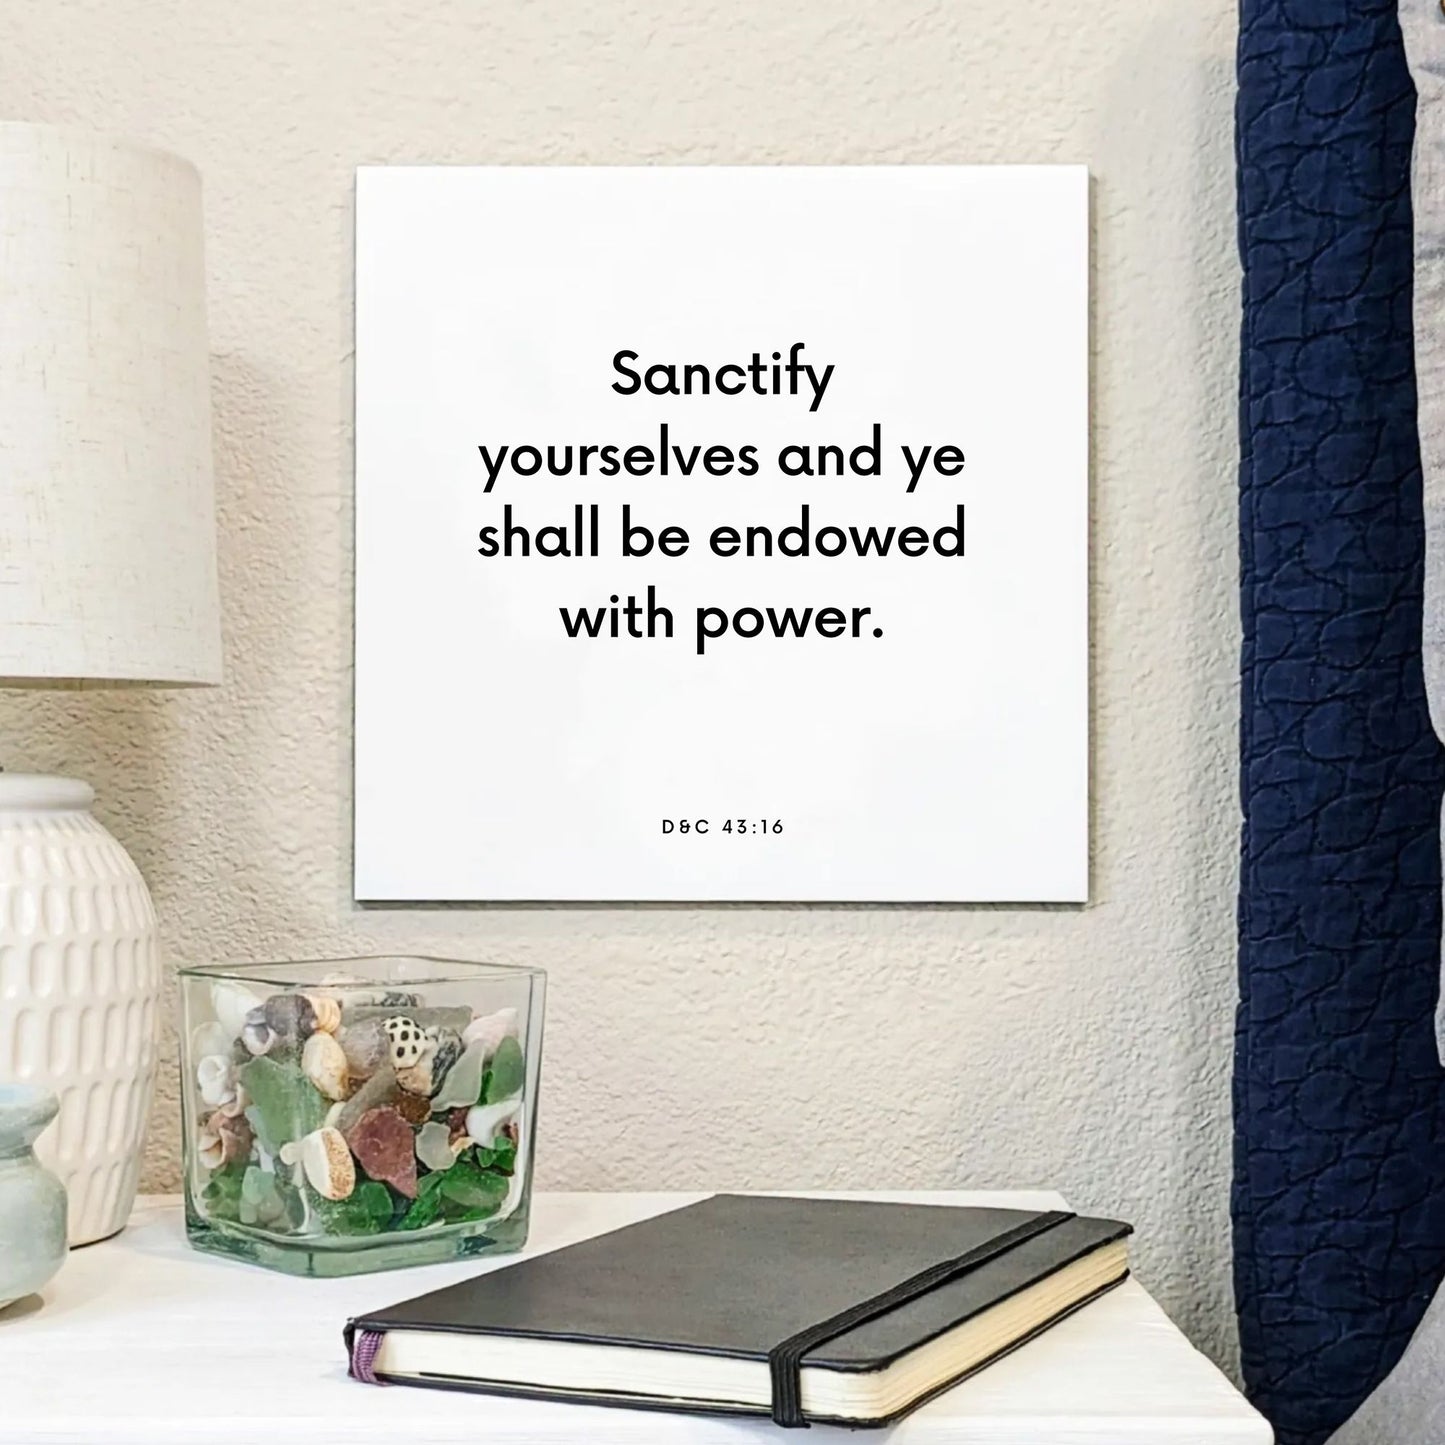 Bedside mouting of the scripture tile for D&C 43:16 - "Sanctify yourselves and ye shall be endowed with power"